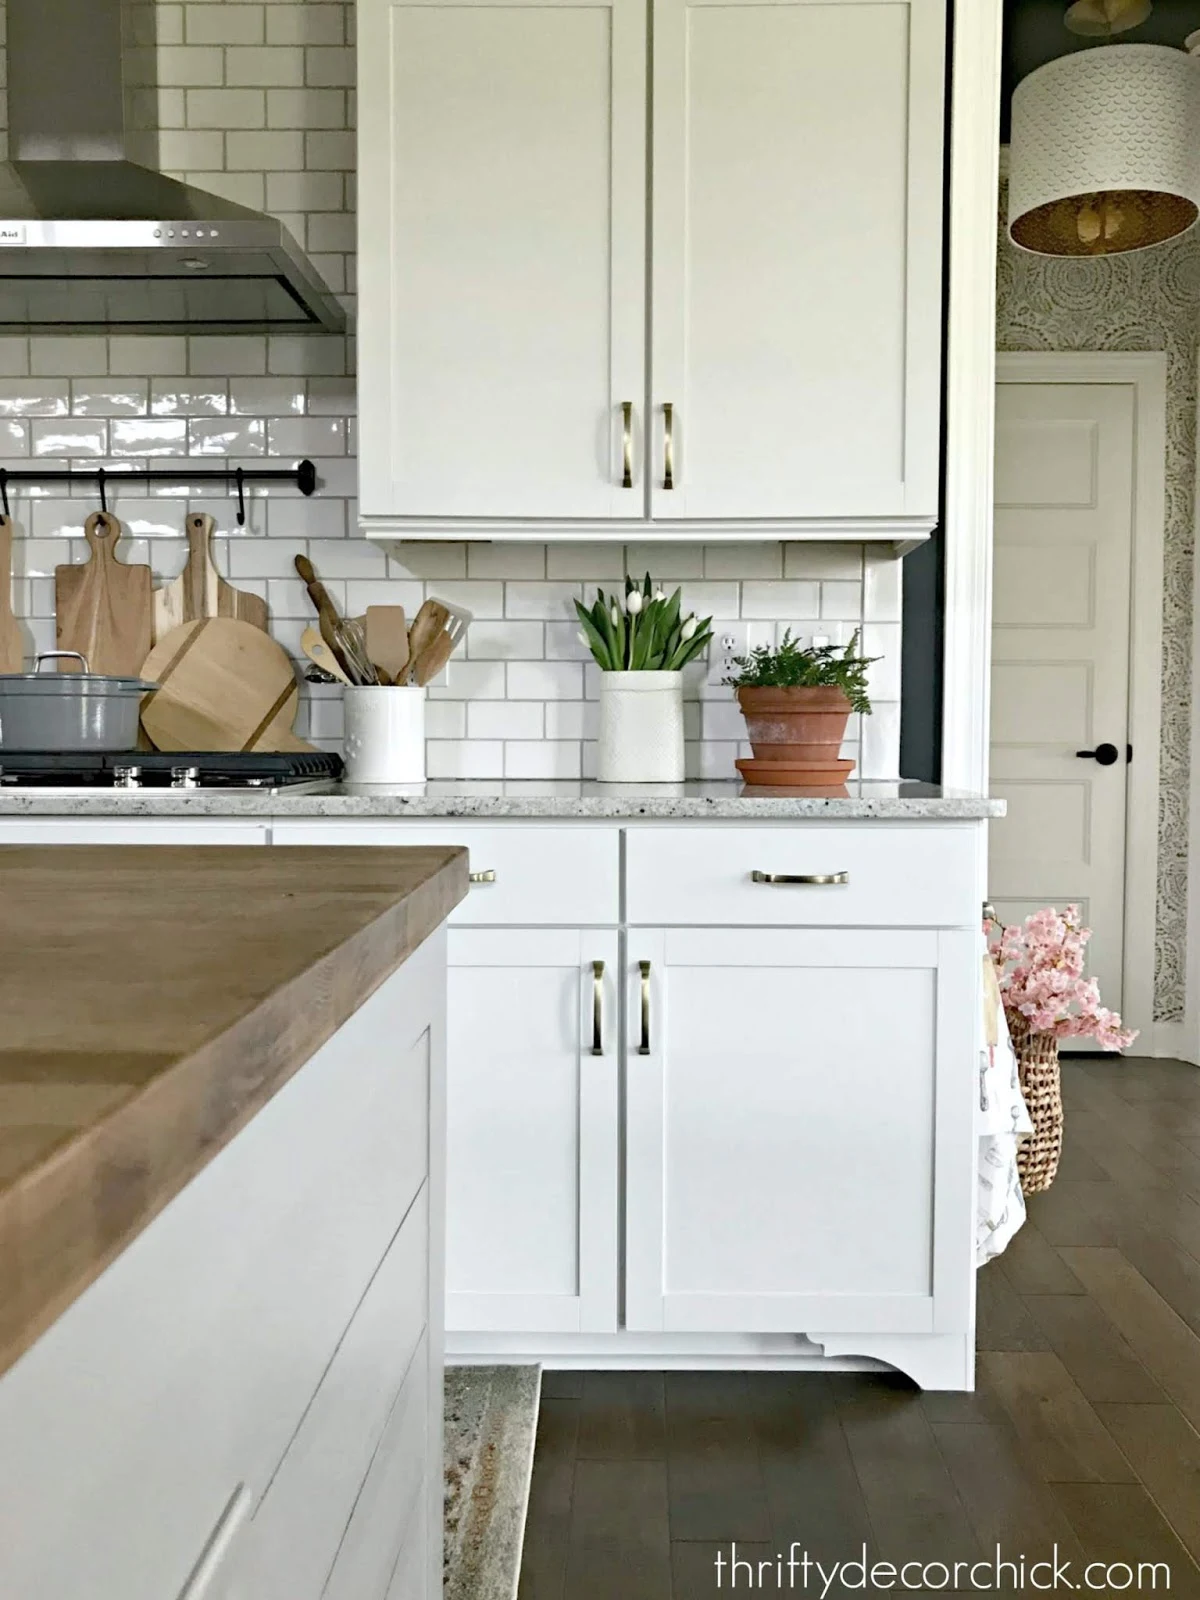 How to add light rails under cabinets